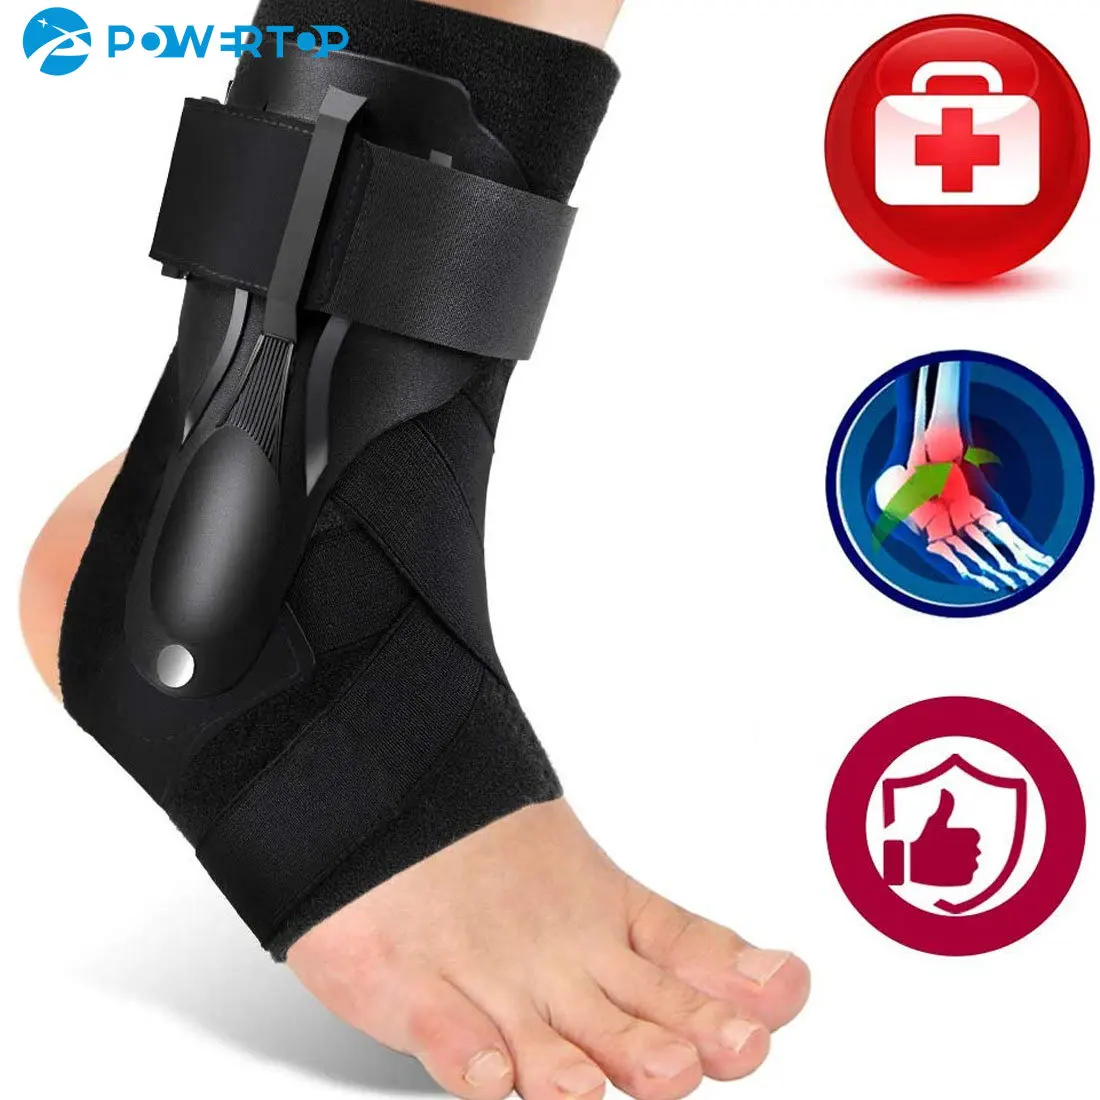 Ankle Brace Adjustable Support-Injury Recovery,Ankle Brace for Women,Ankle Brace Stabilizer,Ankle Brace for Sprained Ankle